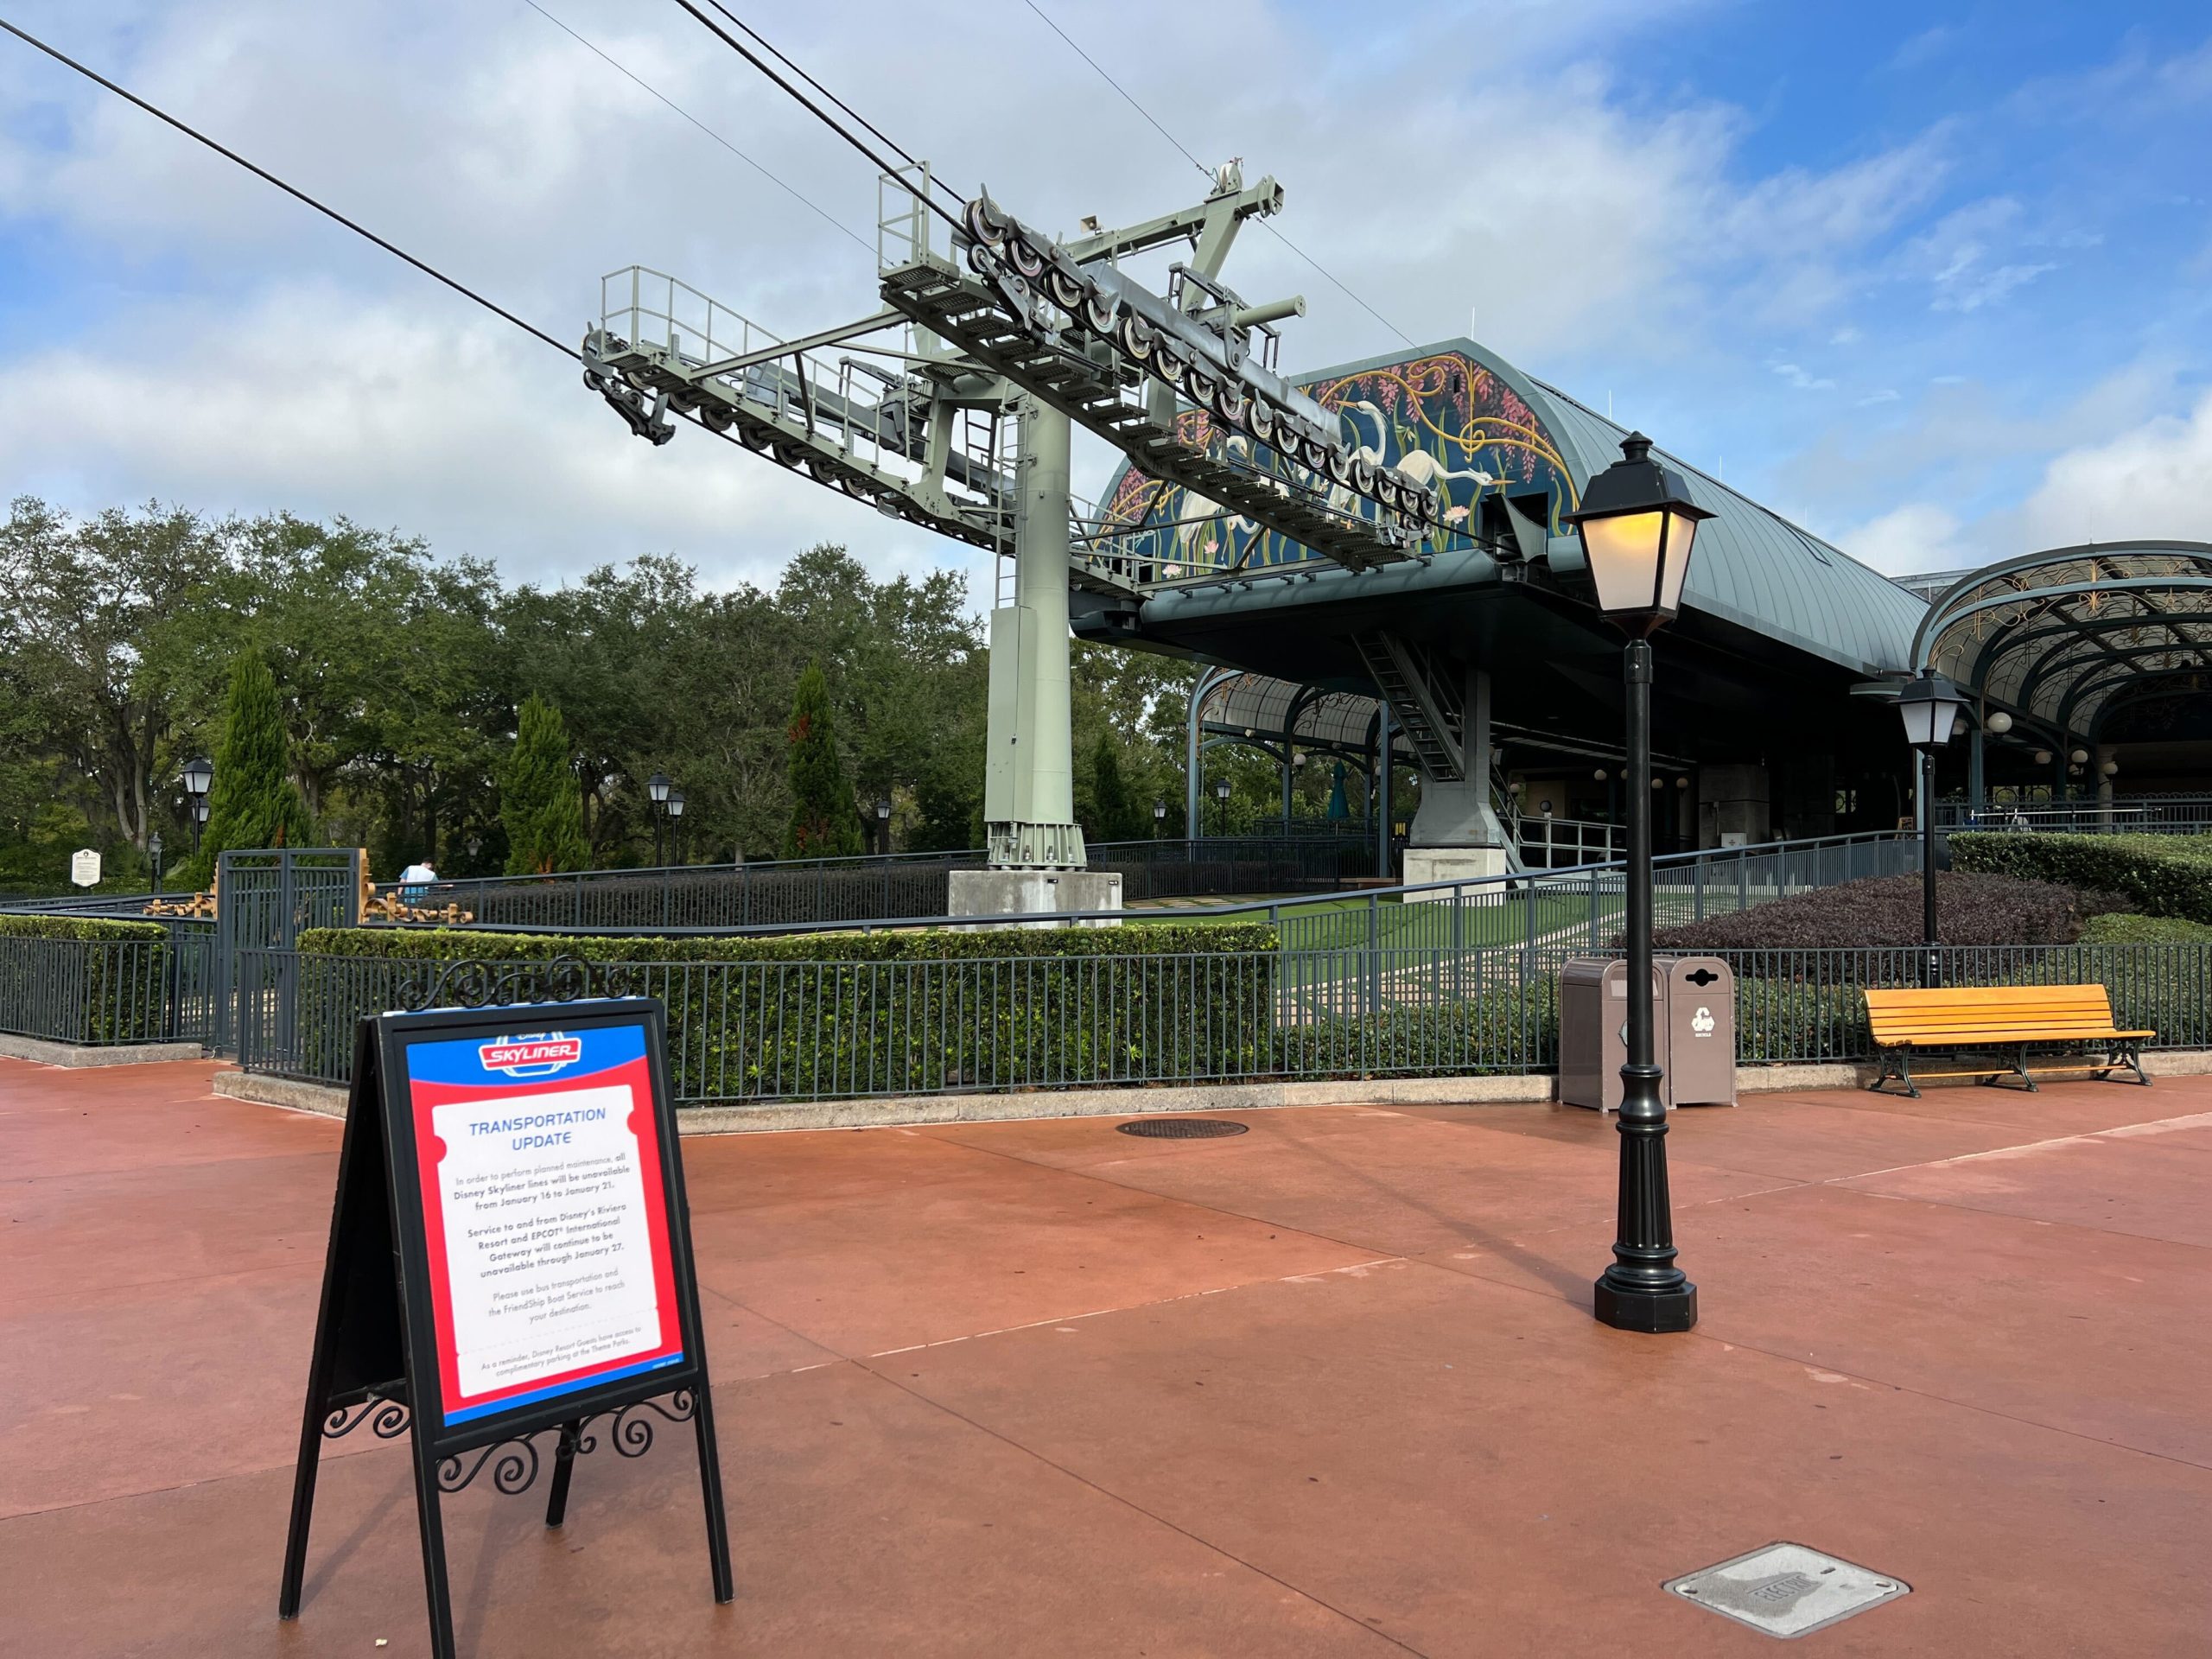 Skyliner was closed for refurbishment